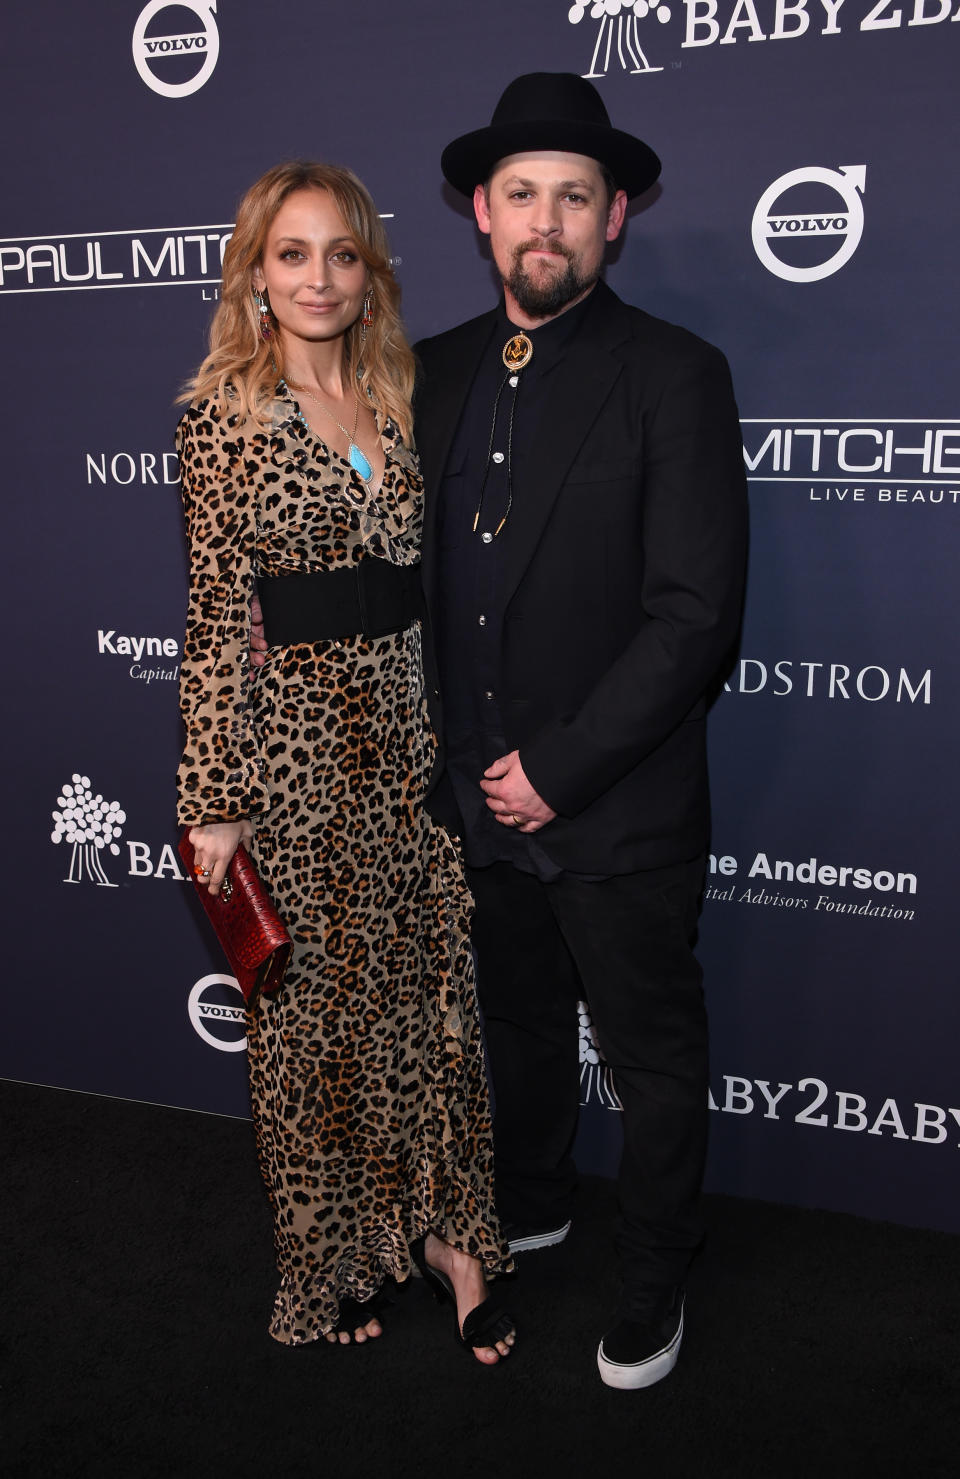 Nicole Richie and Joel Madden at the Baby2Baby gala